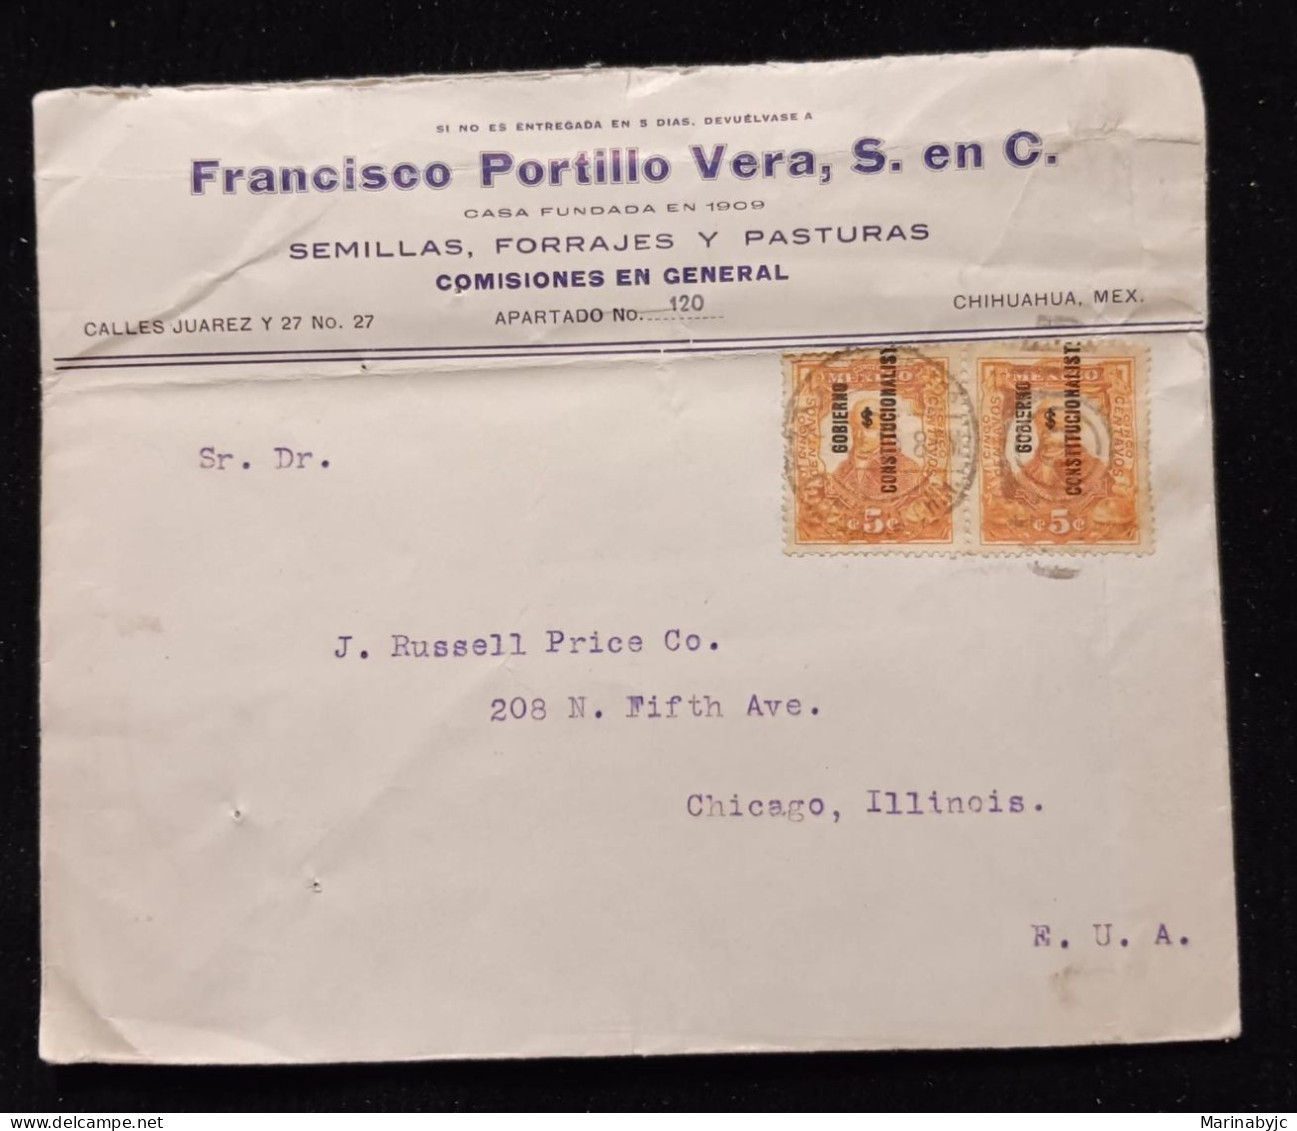 C) 1915. MEXICO. AIRMAIL ENVELOPE SENT TO USA. DOUBLE STAMP. 2ND CHOICE - Mexico